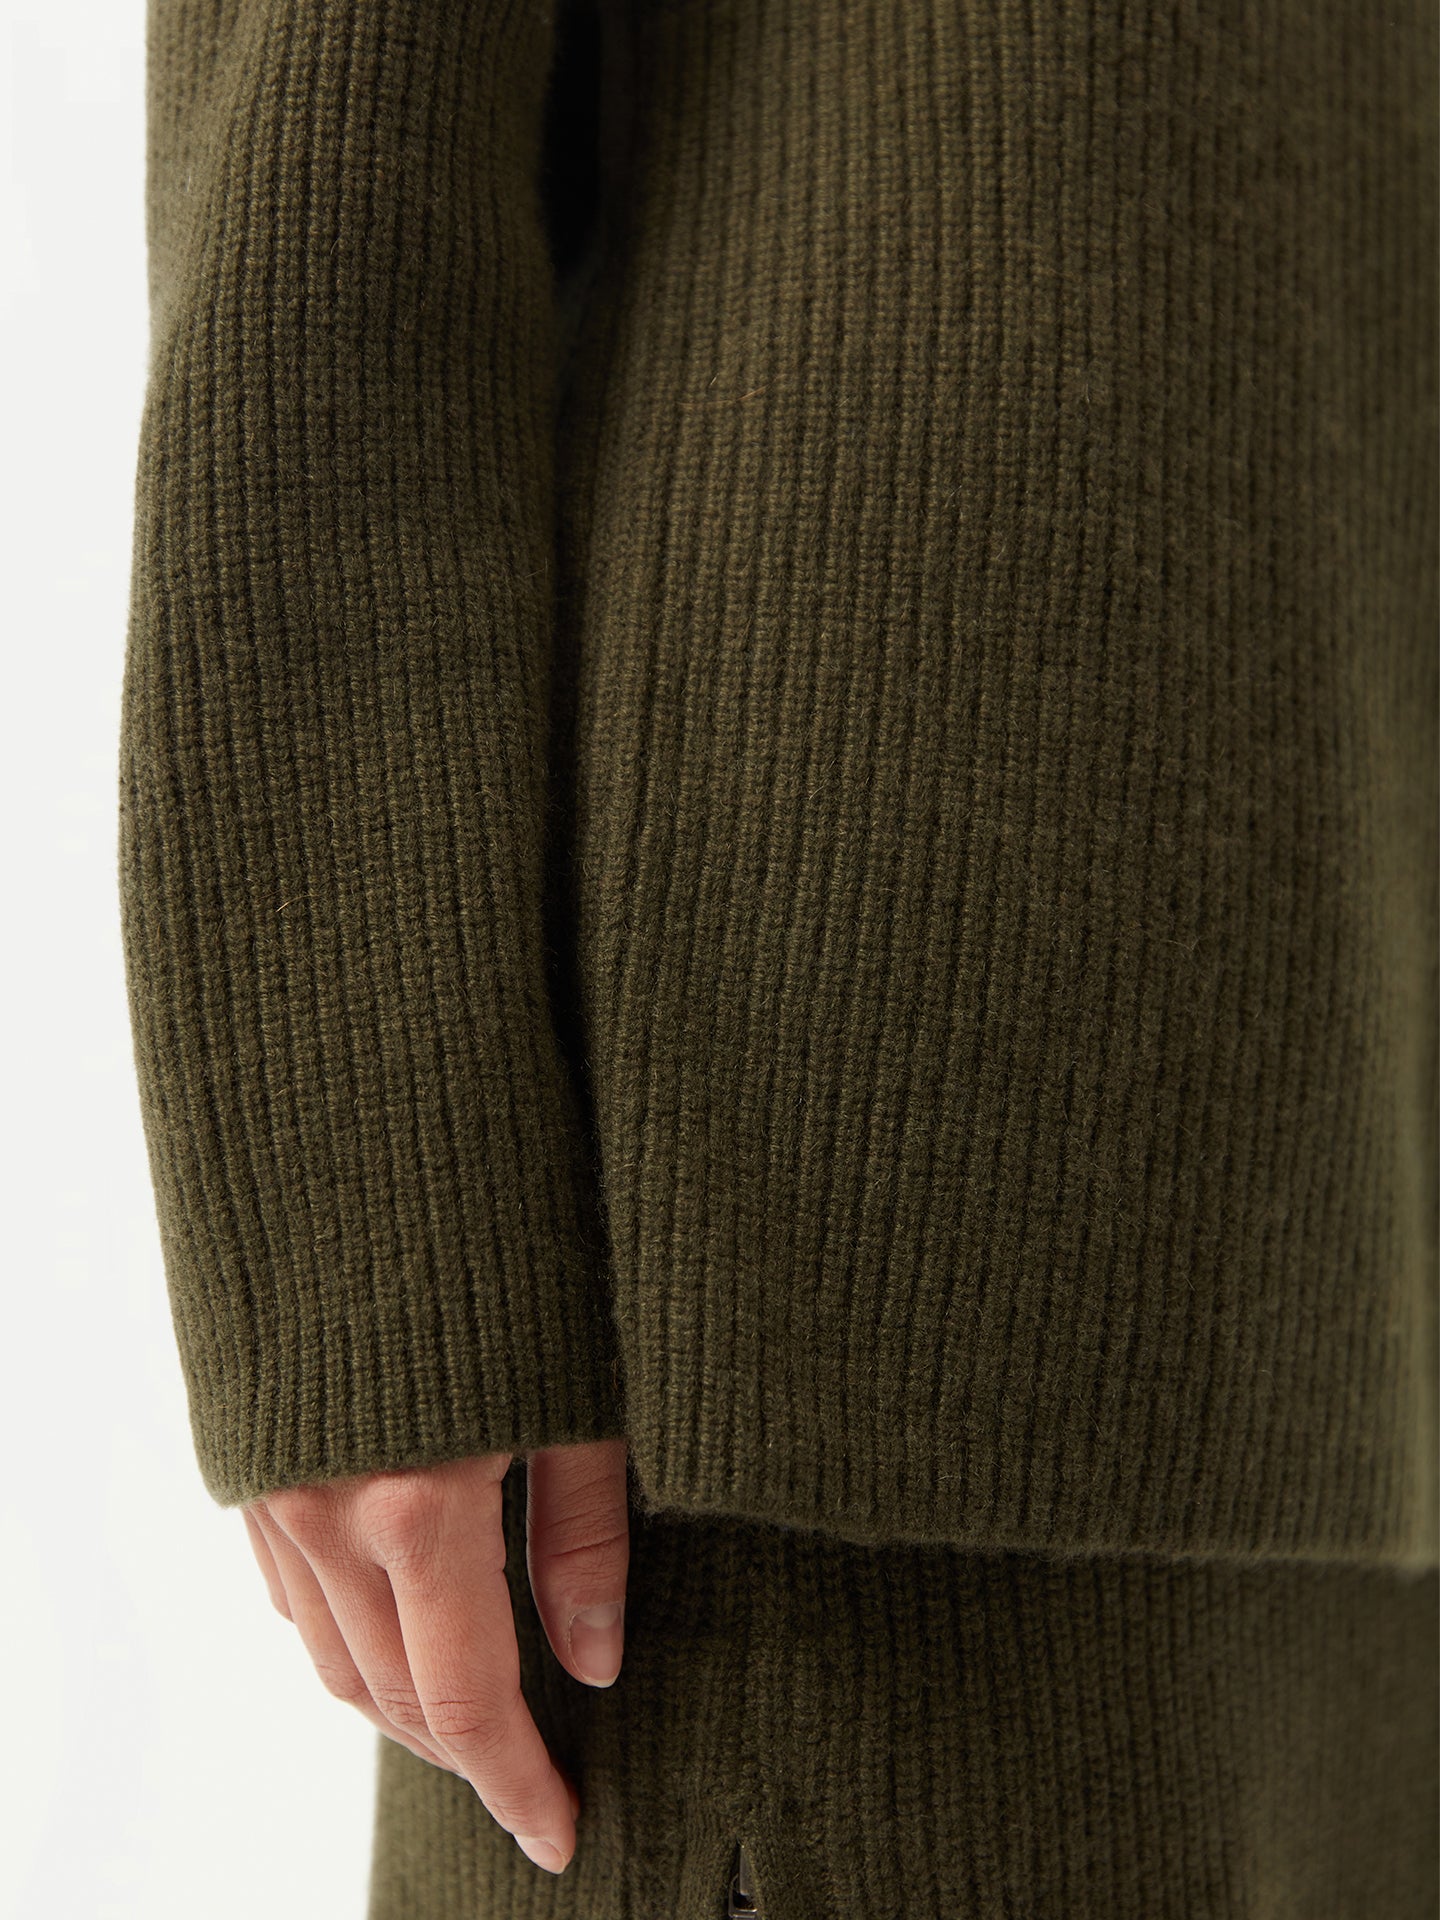 Women's Cashmere Sweater with Side Zippers Capulet Olive - Gobi Cashmere